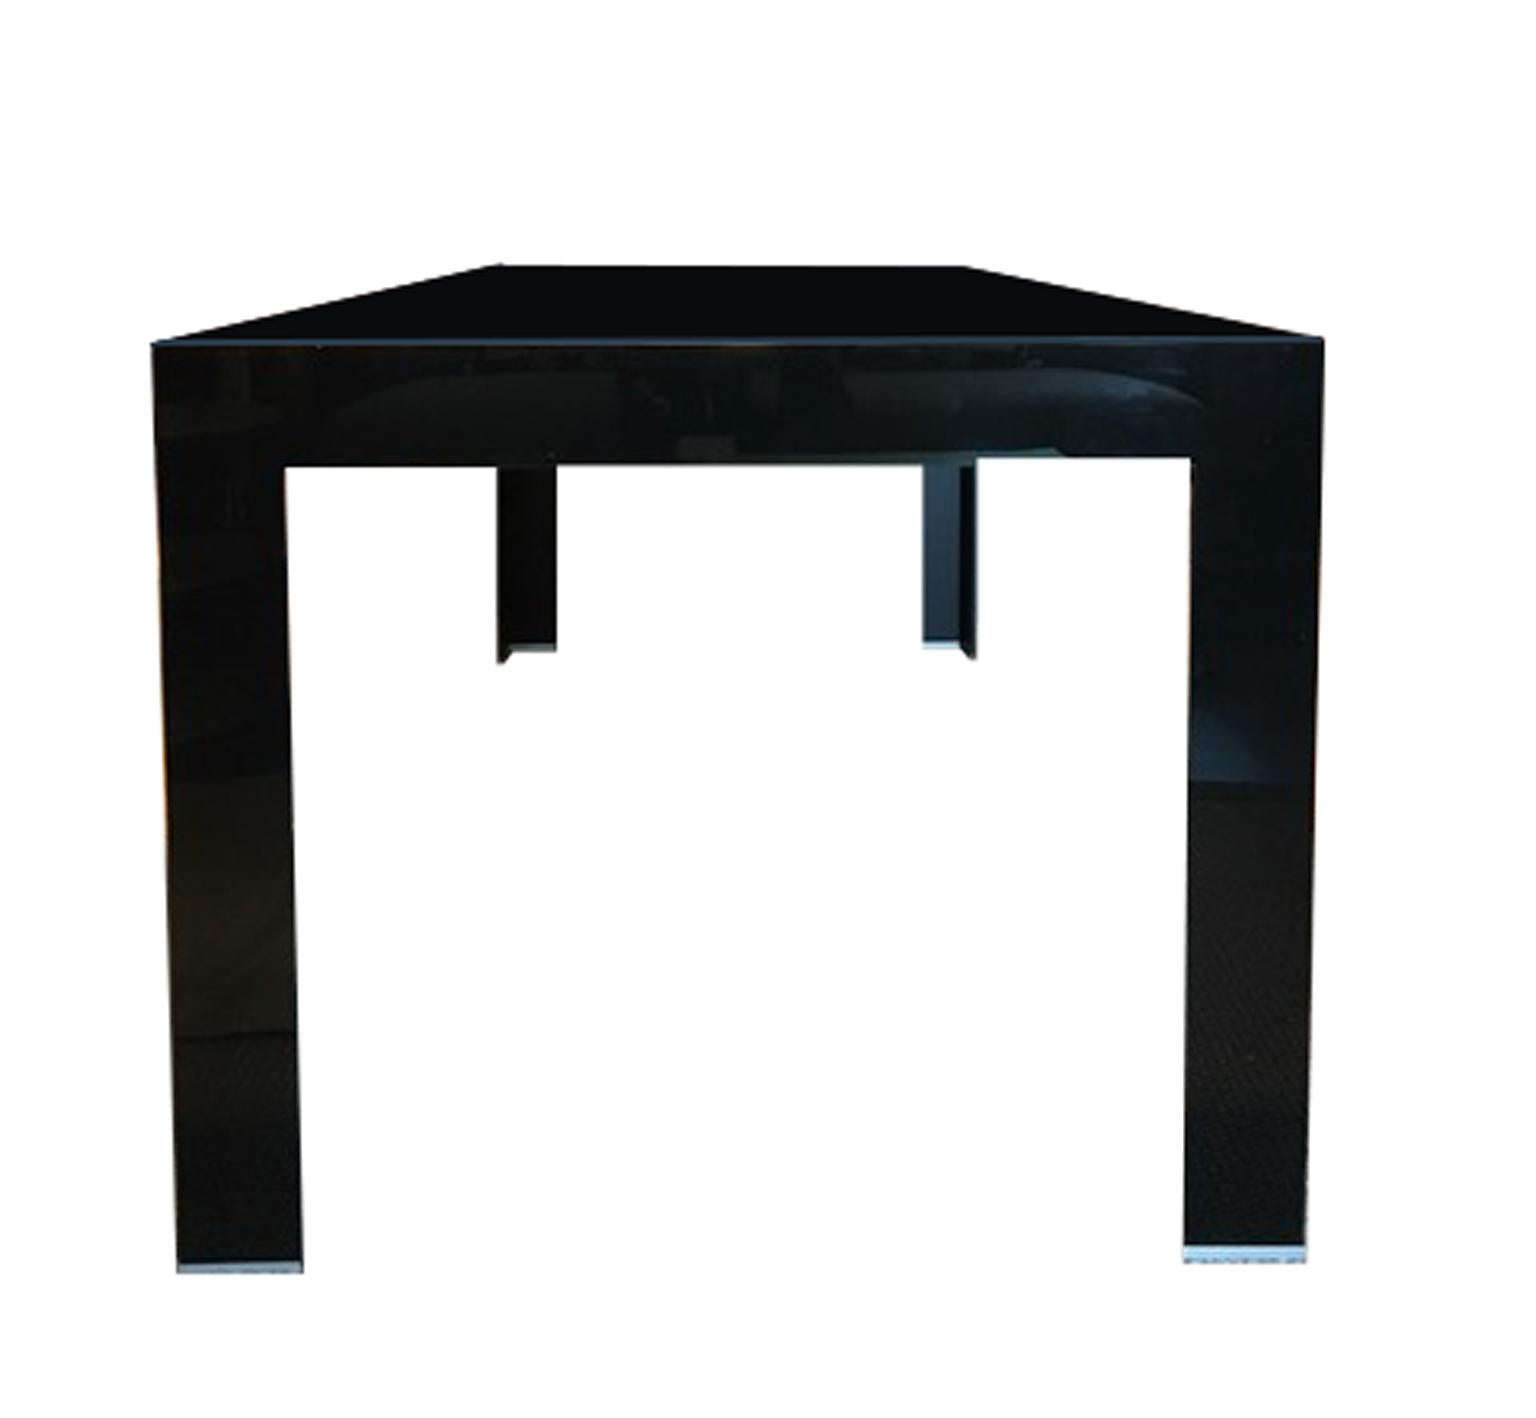 Italian Design Black Glass Dining Table in Minimal Style Contemporary Production For Sale 5